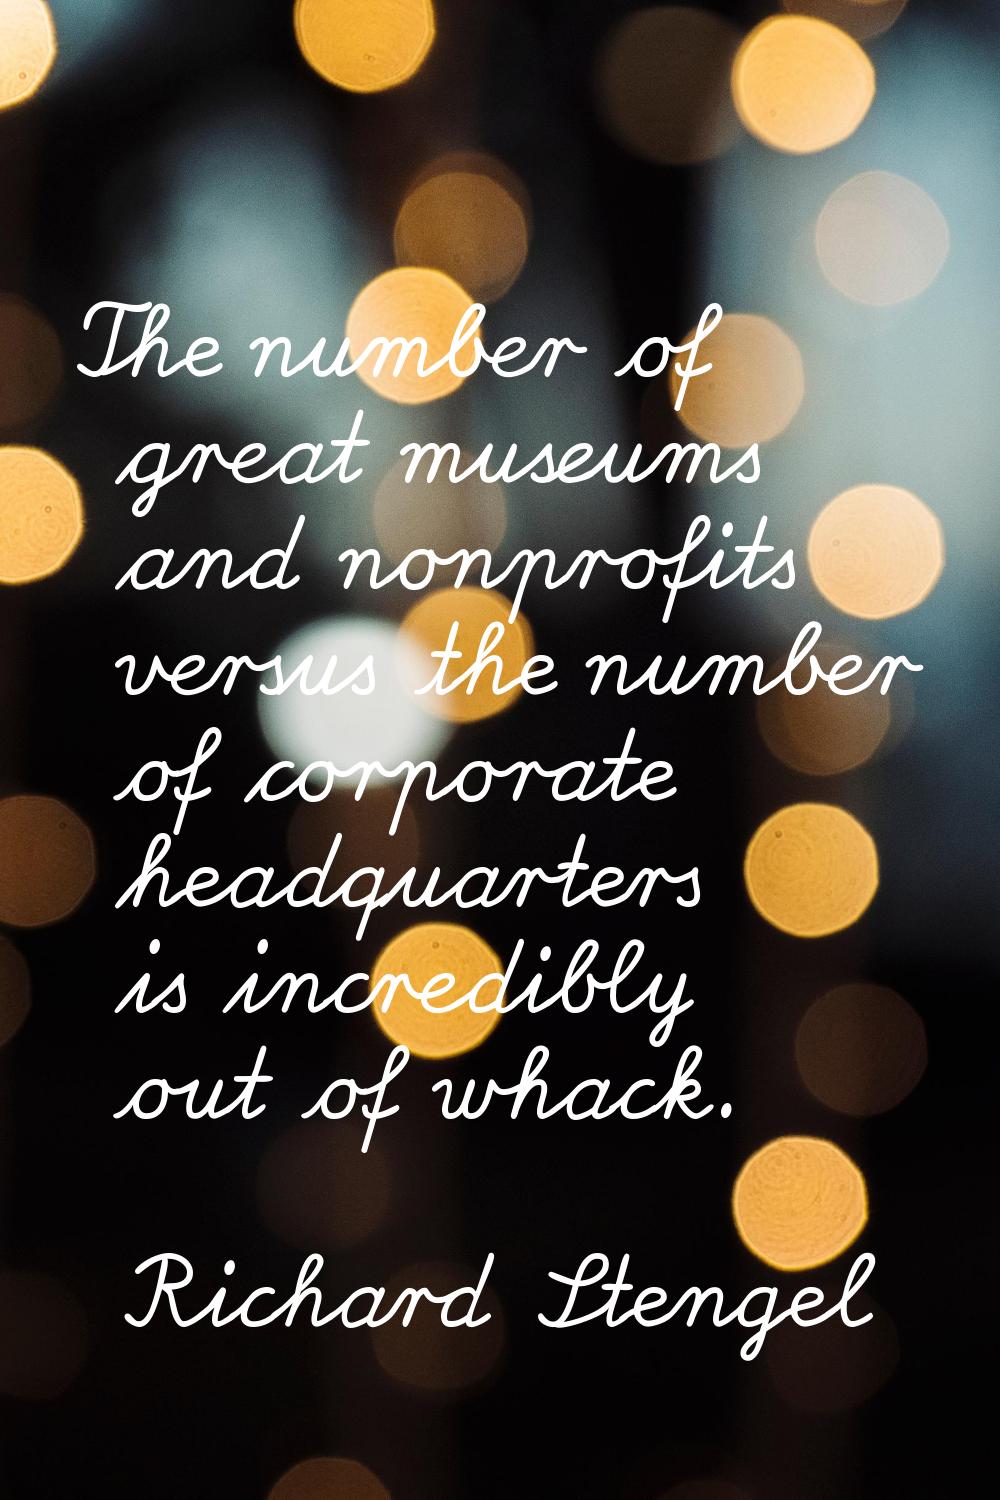 The number of great museums and nonprofits versus the number of corporate headquarters is incredibl